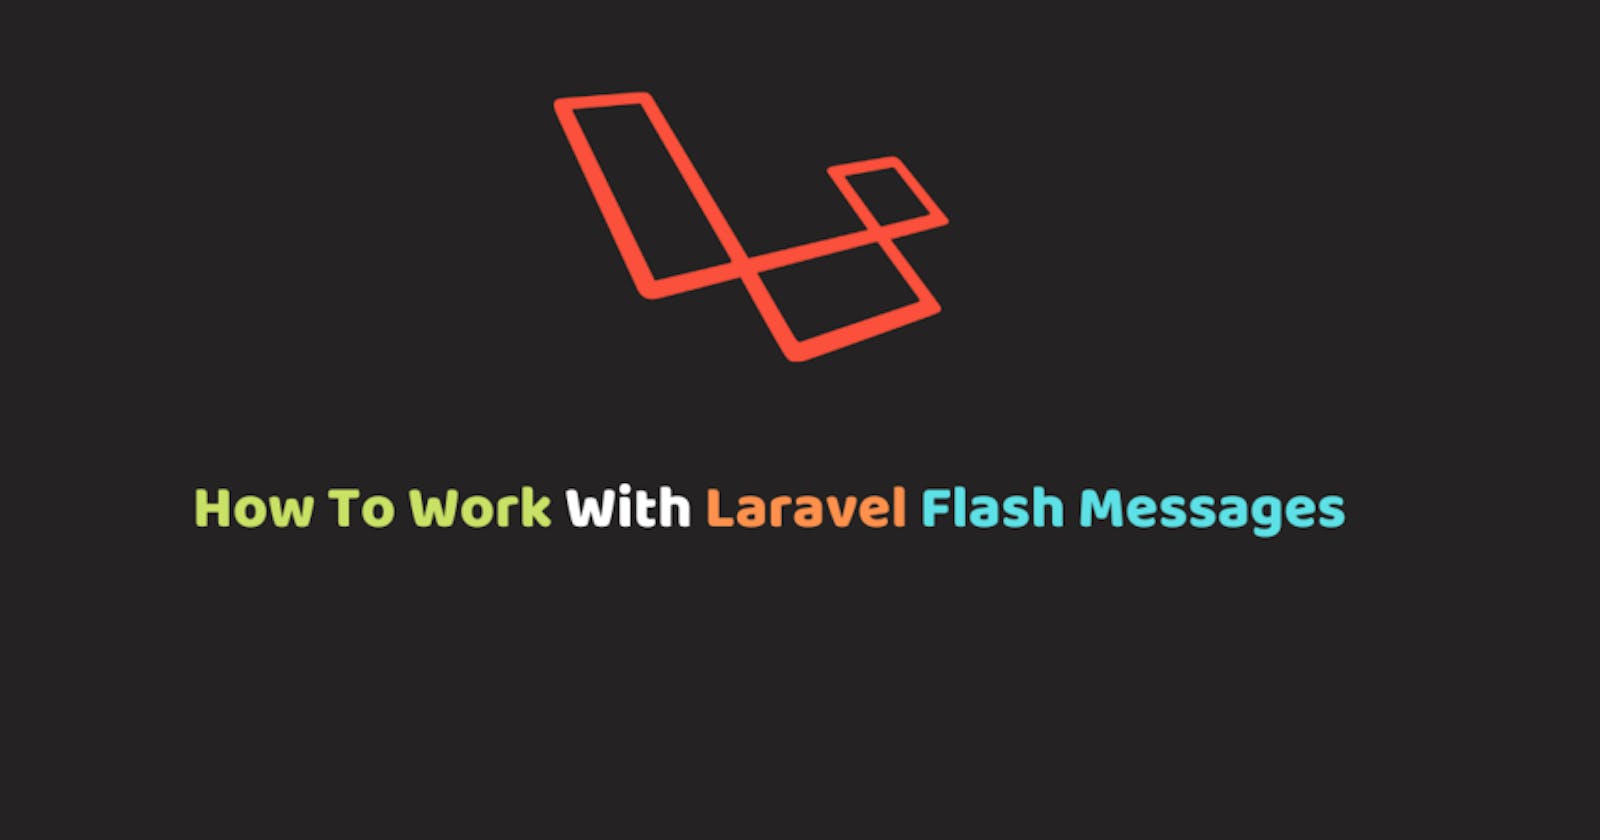 How To Work With Laravel Flash Messages